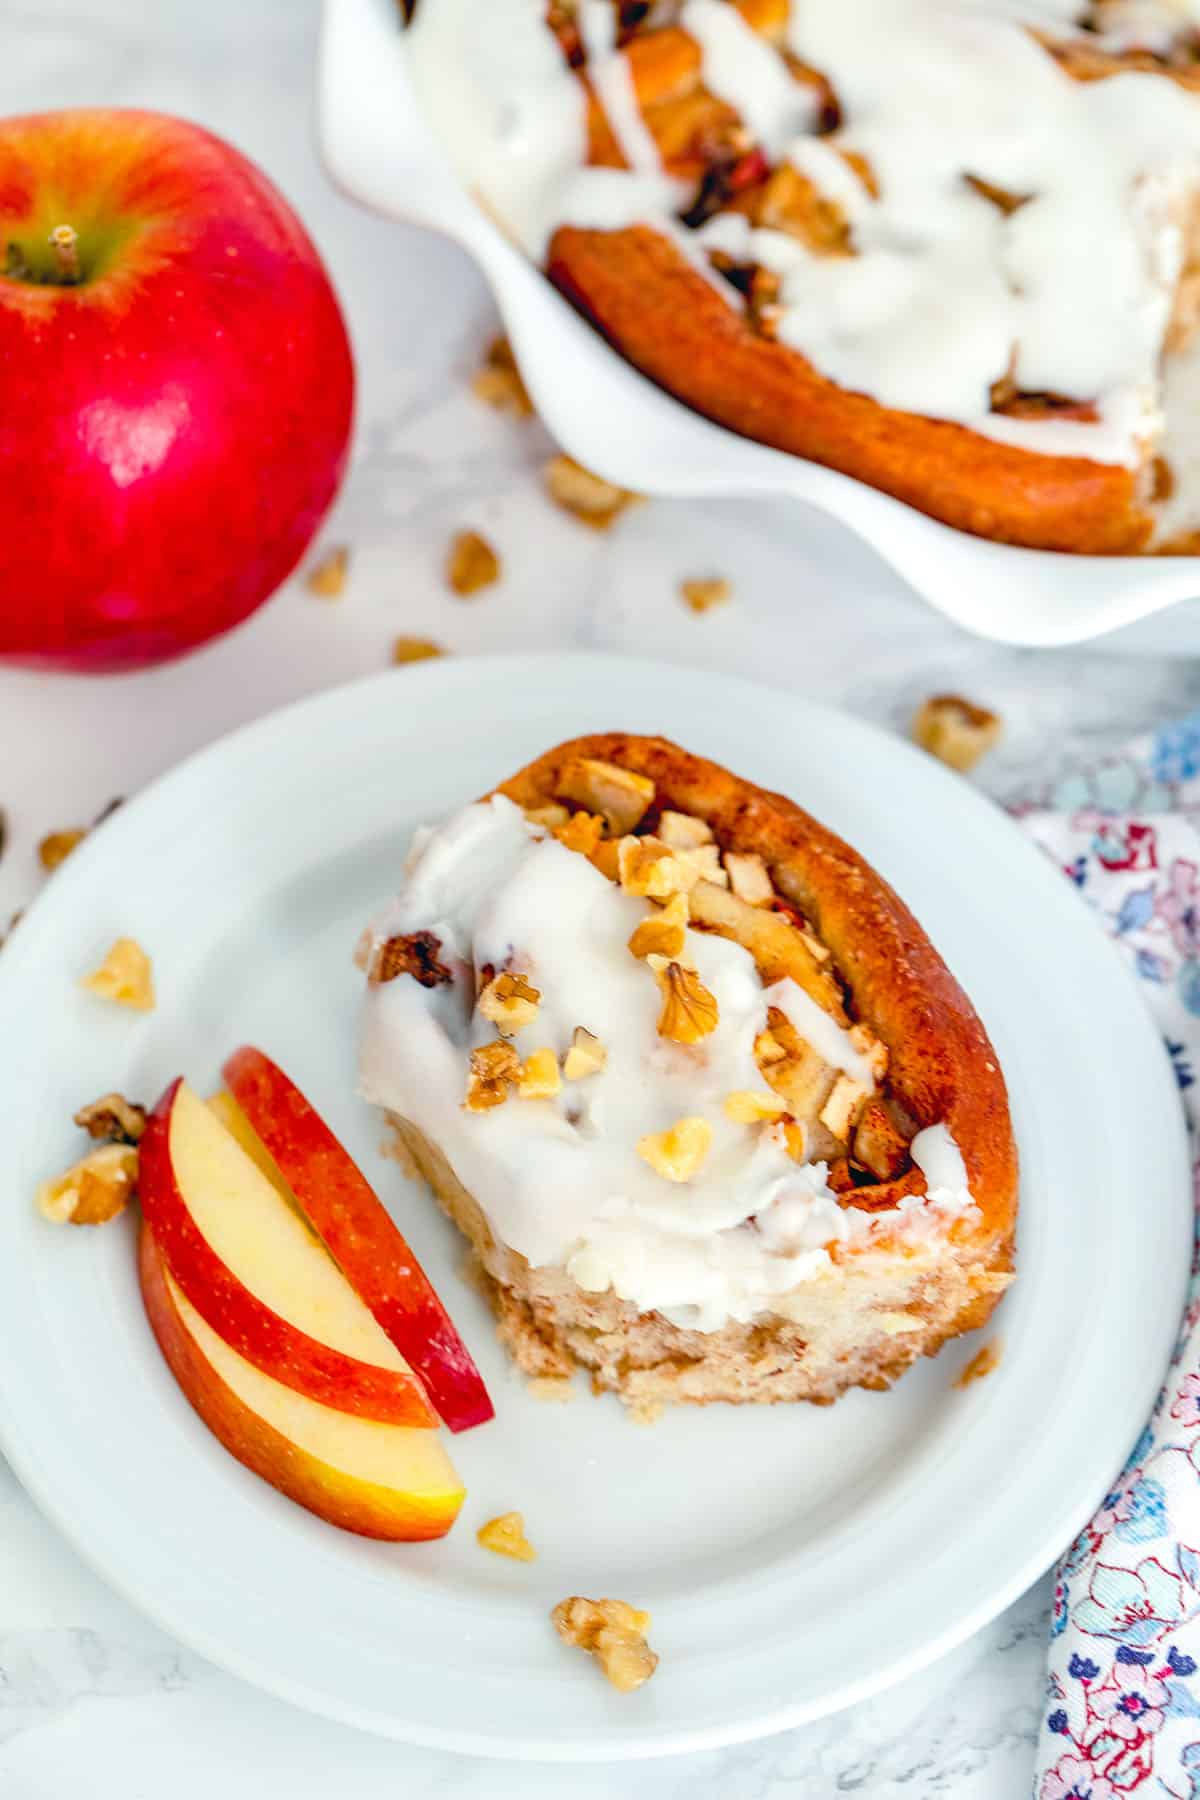 Overhead view of an apple walnut cinnamon roll on a plate with sliced apples with whole apple and dish of cinnamon rolls in the background with walnuts scattered all around.